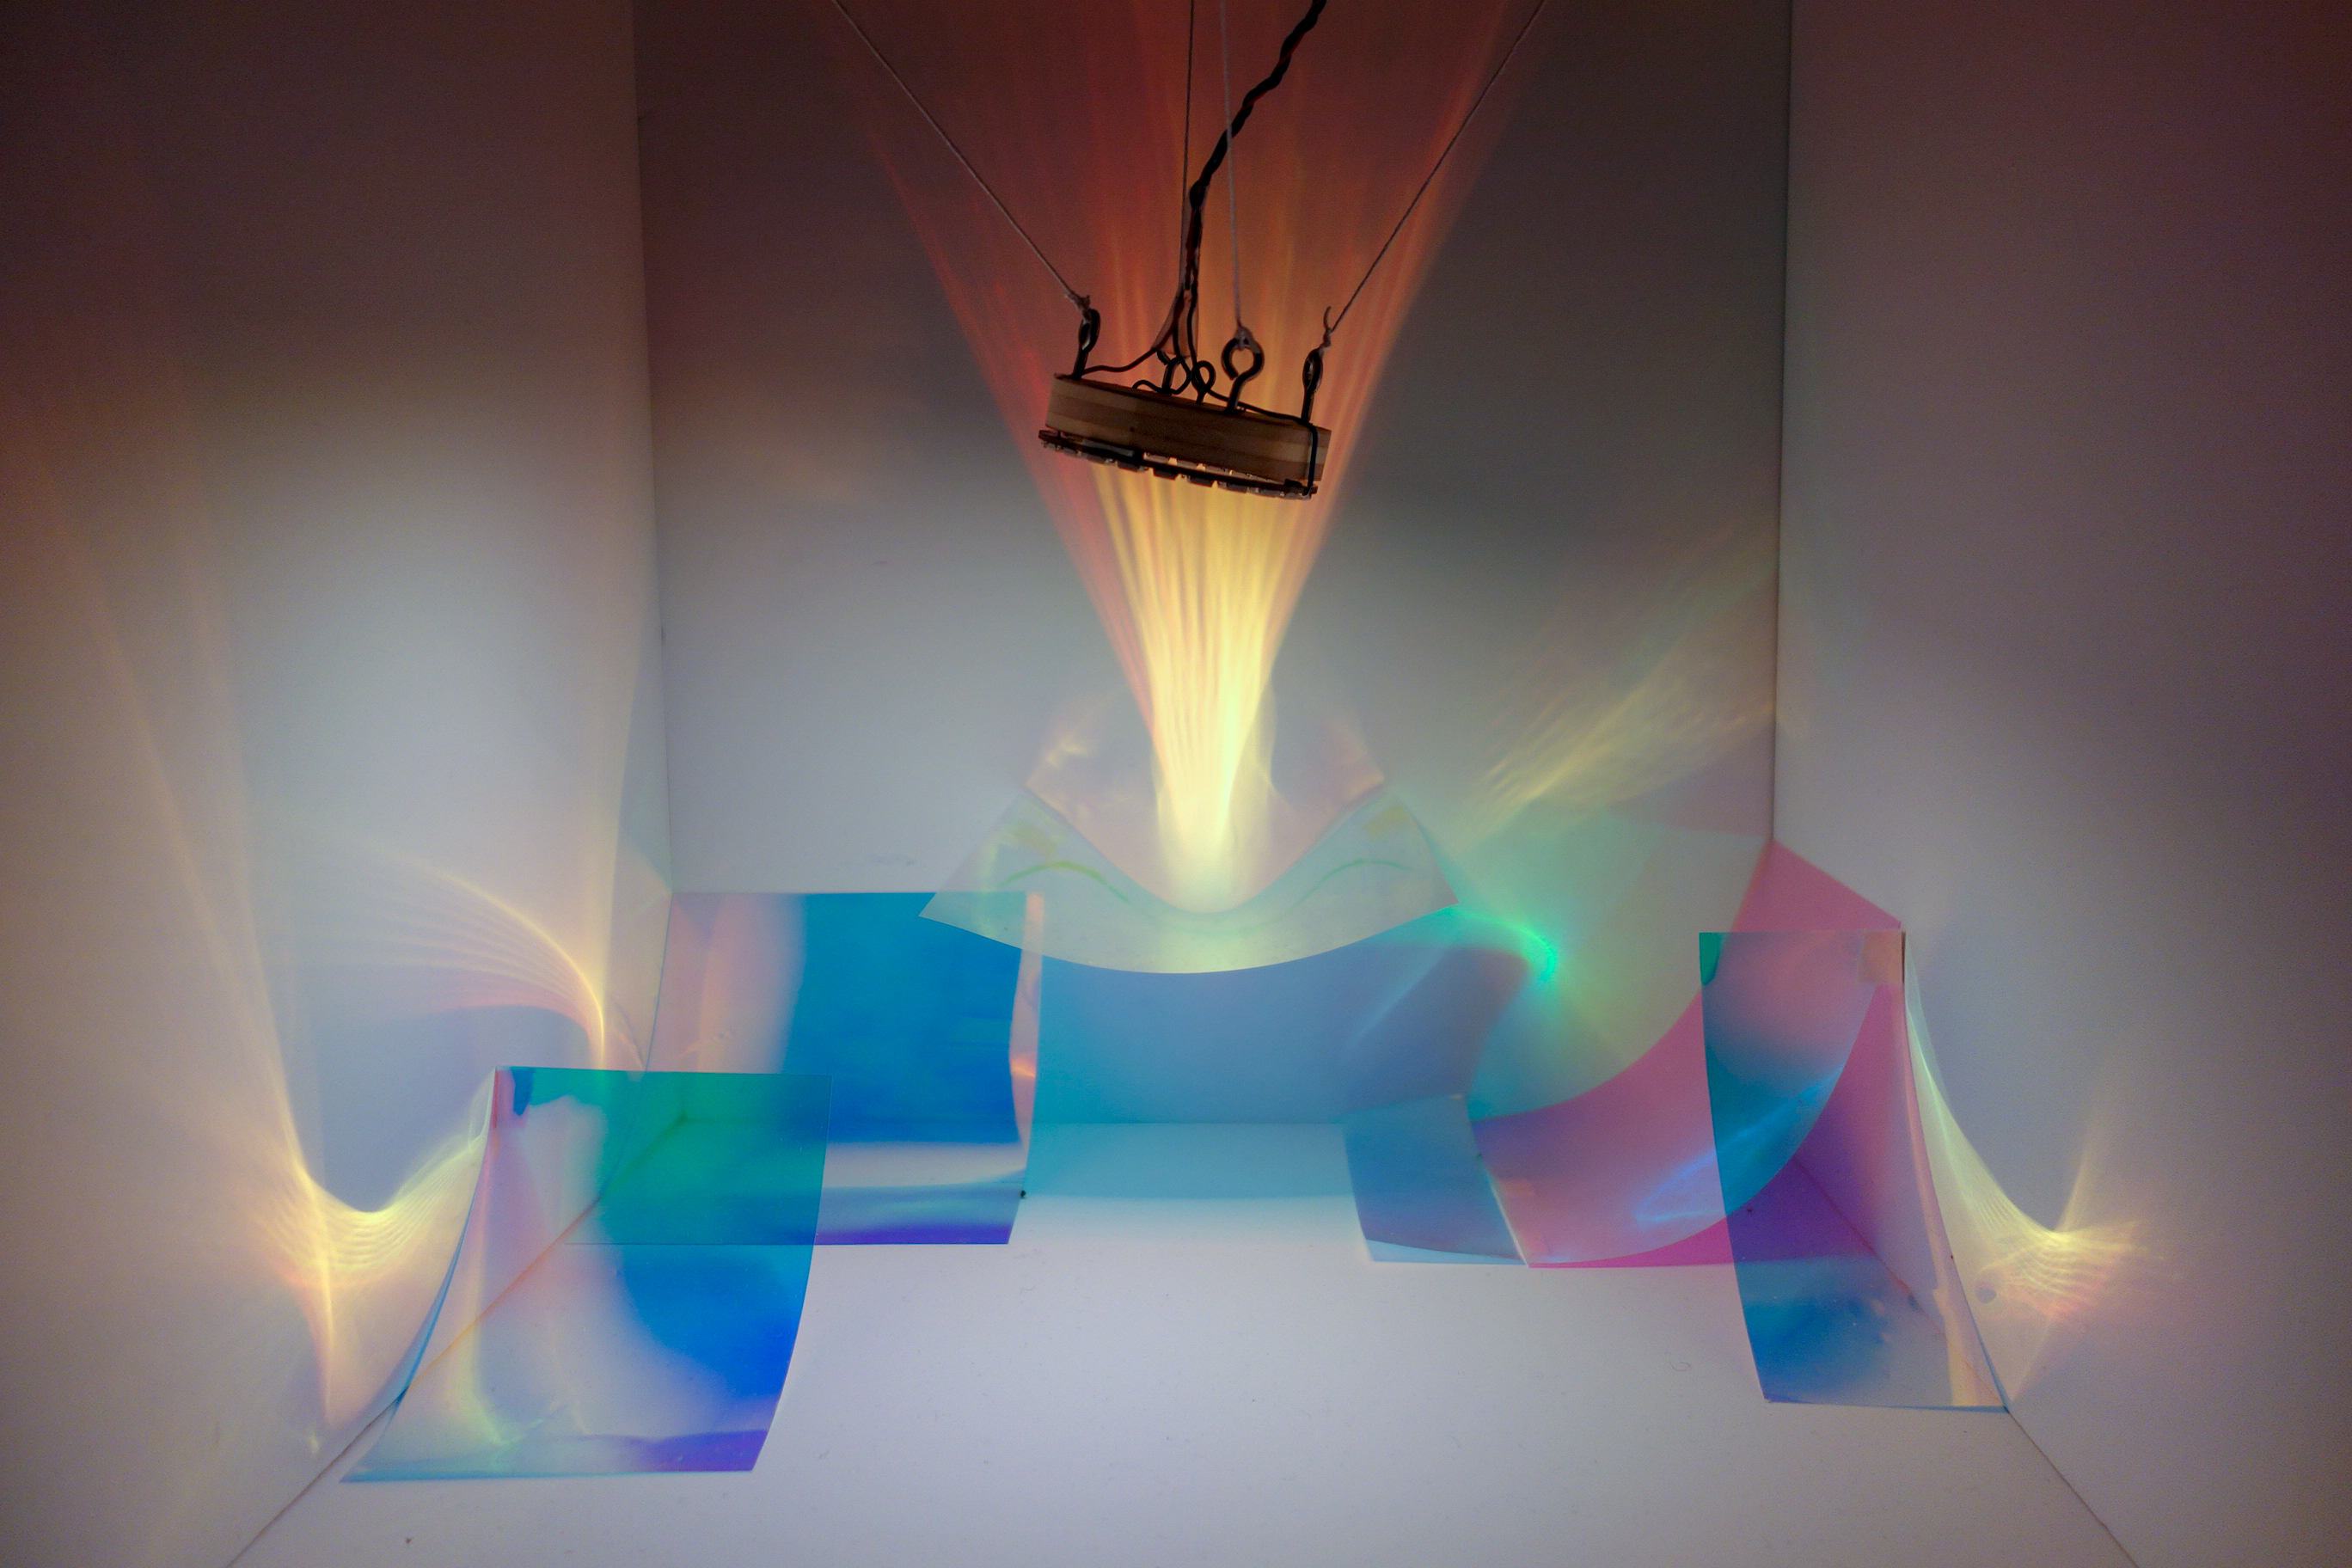 Get lost in the sculptural light and reflections of Taking Flight!